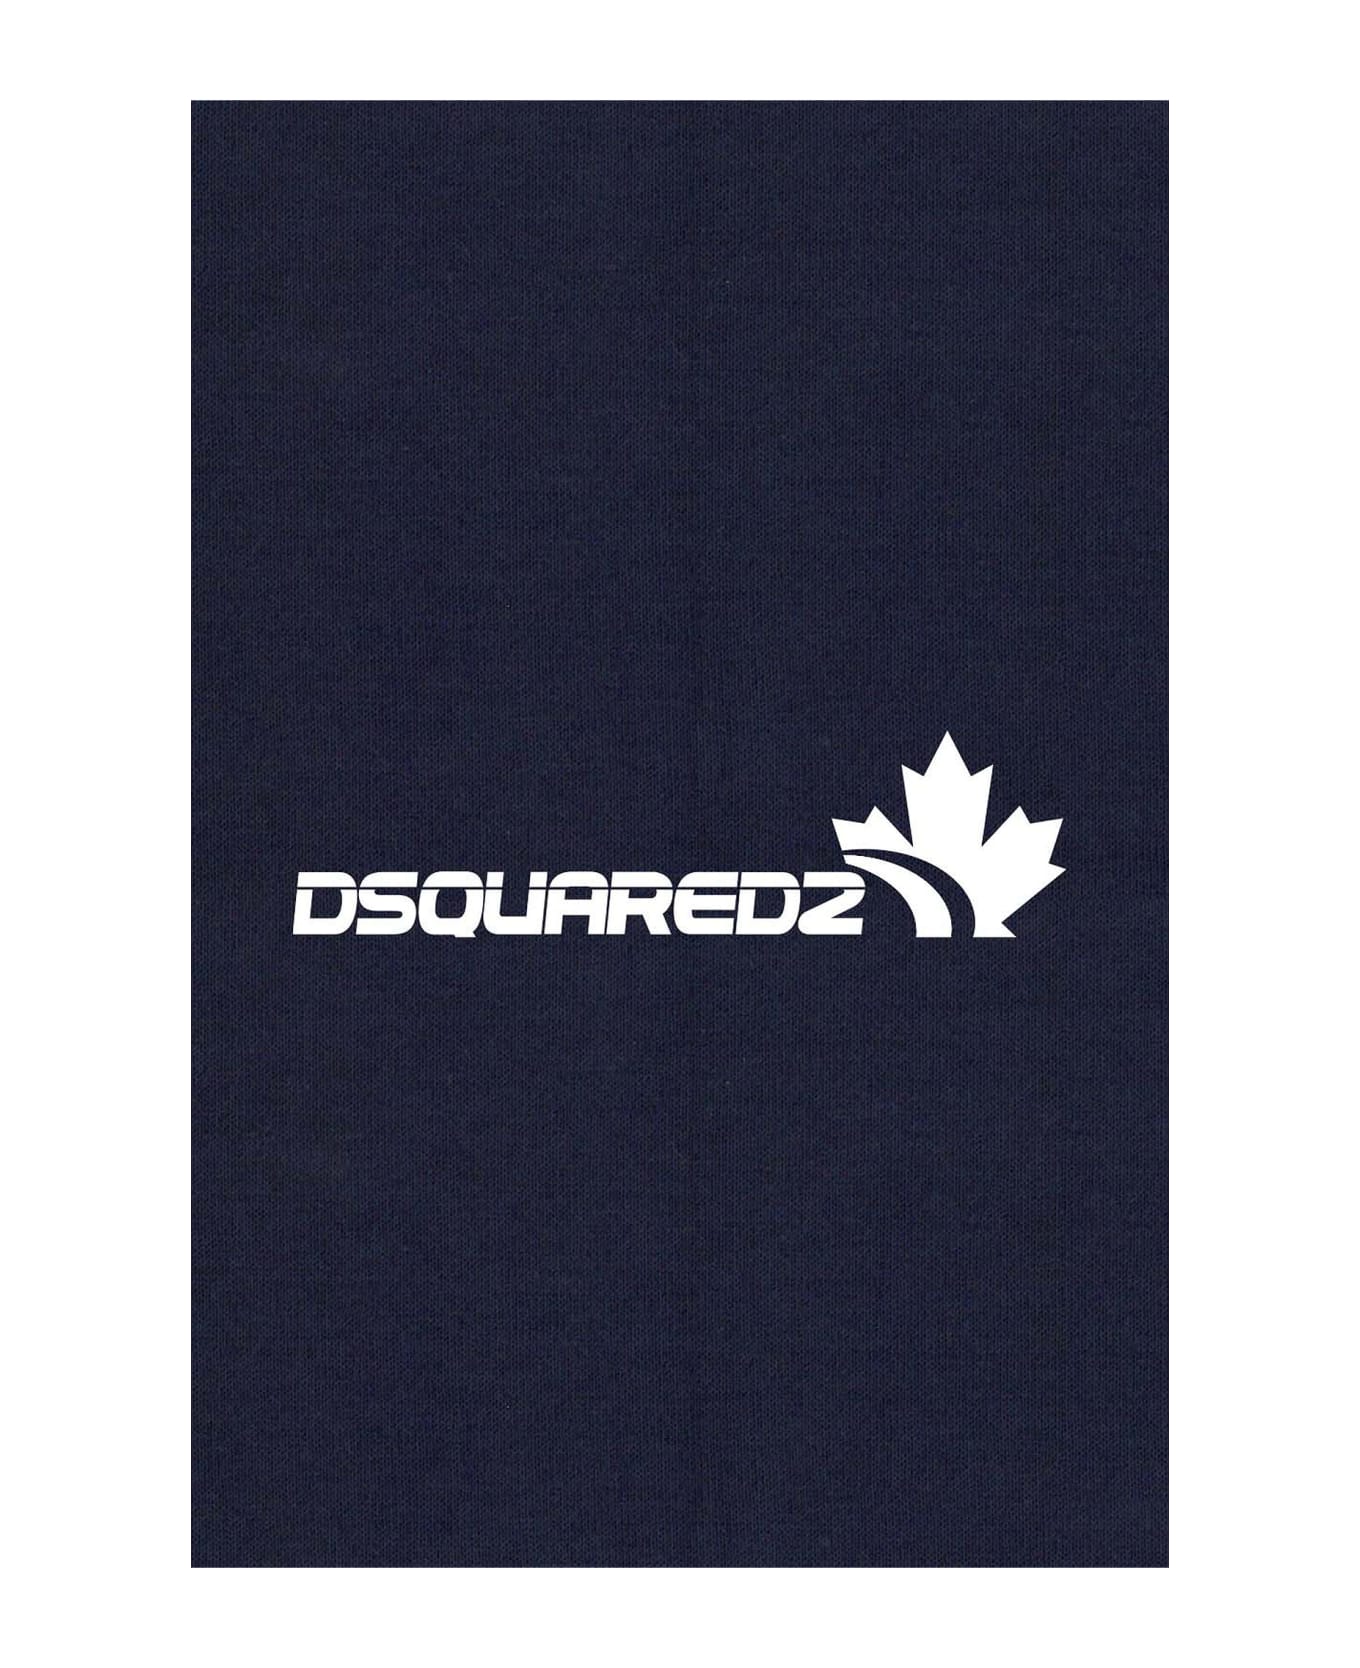 Dsquared2 Cool Fit T-shirt - Navy blue